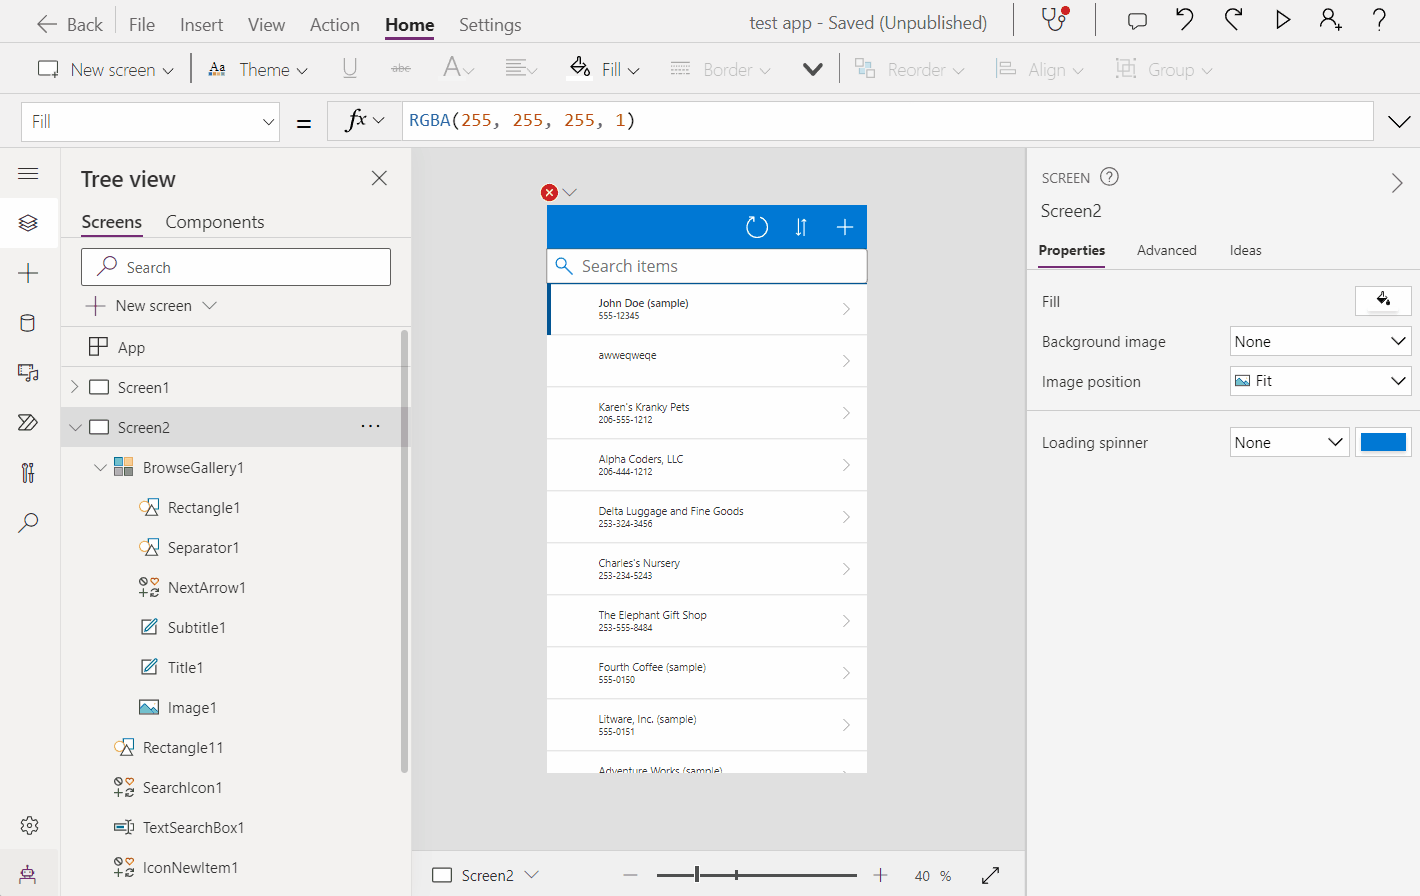 PowerApps